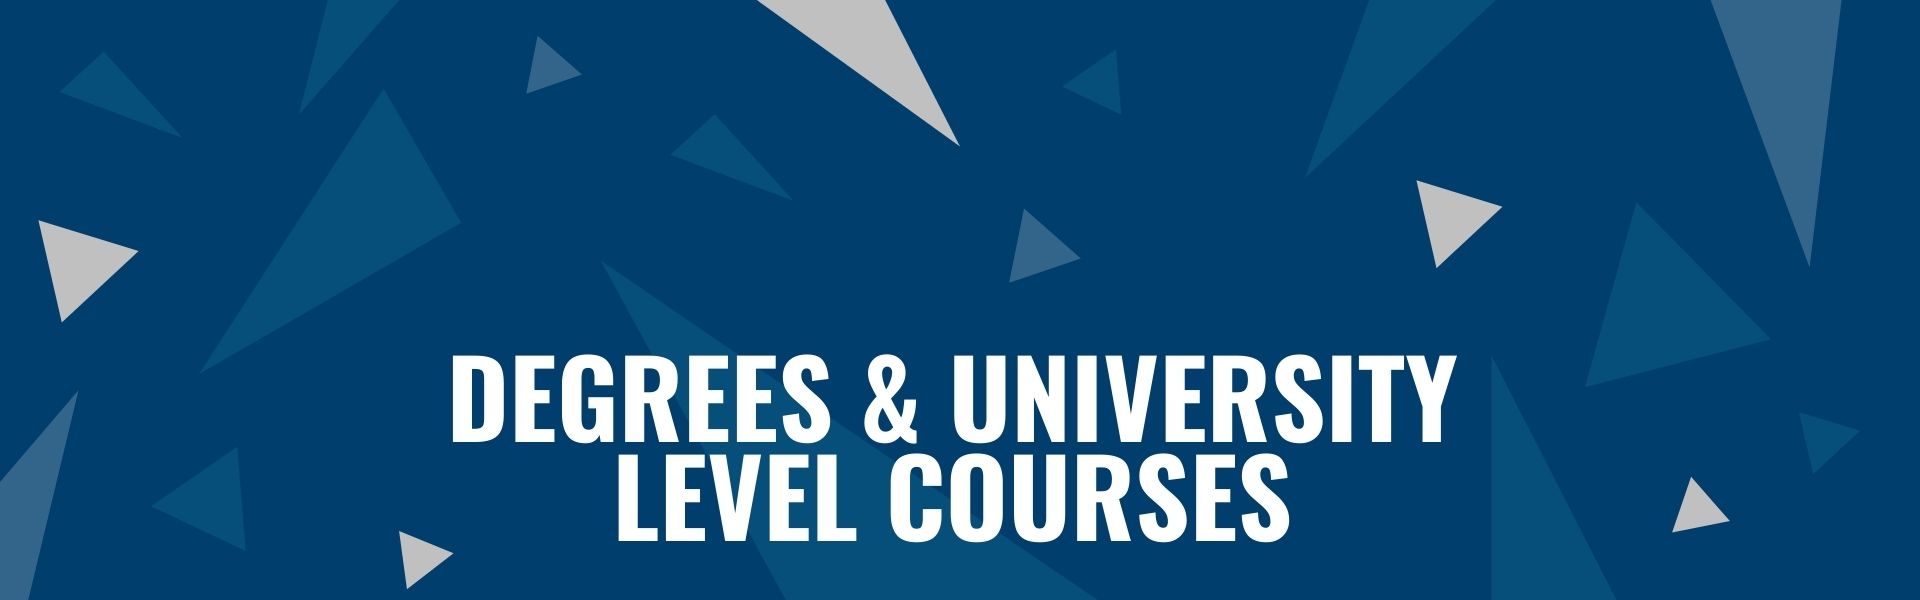 Degrees and University Level Courses